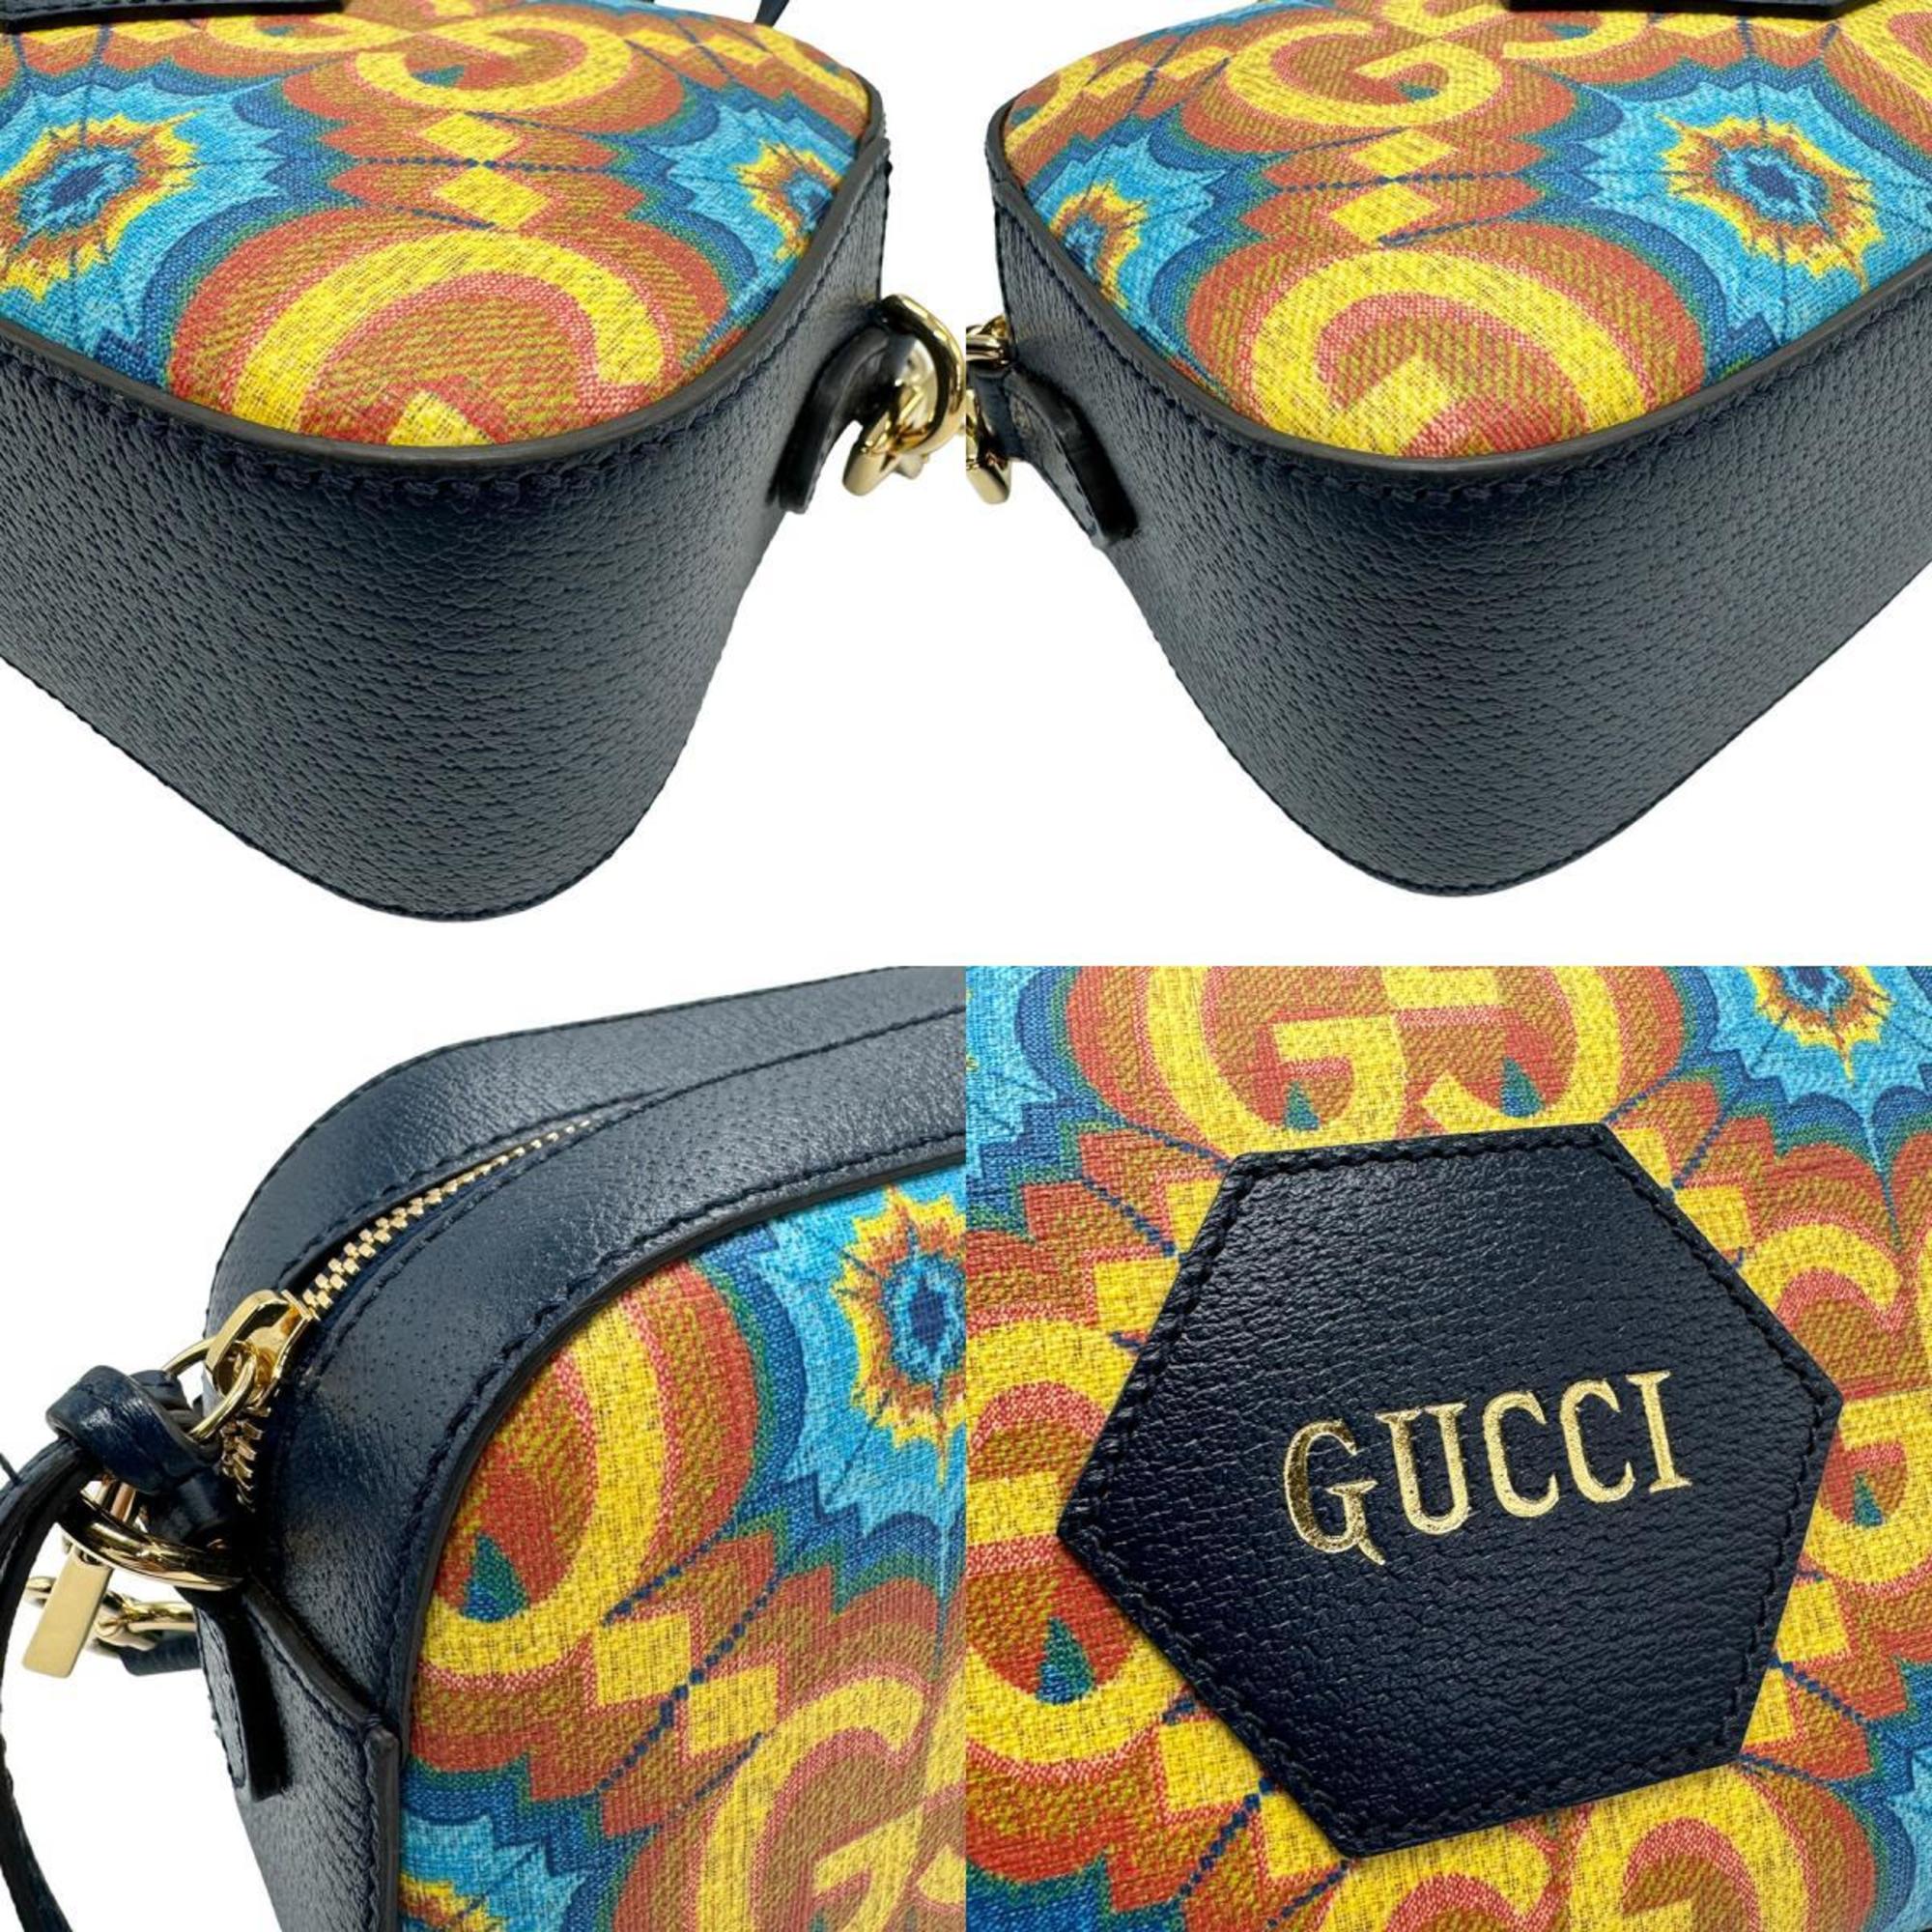 GUCCI Shoulder Bag Leather Yellow Navy Gold Women's 476466 z1240